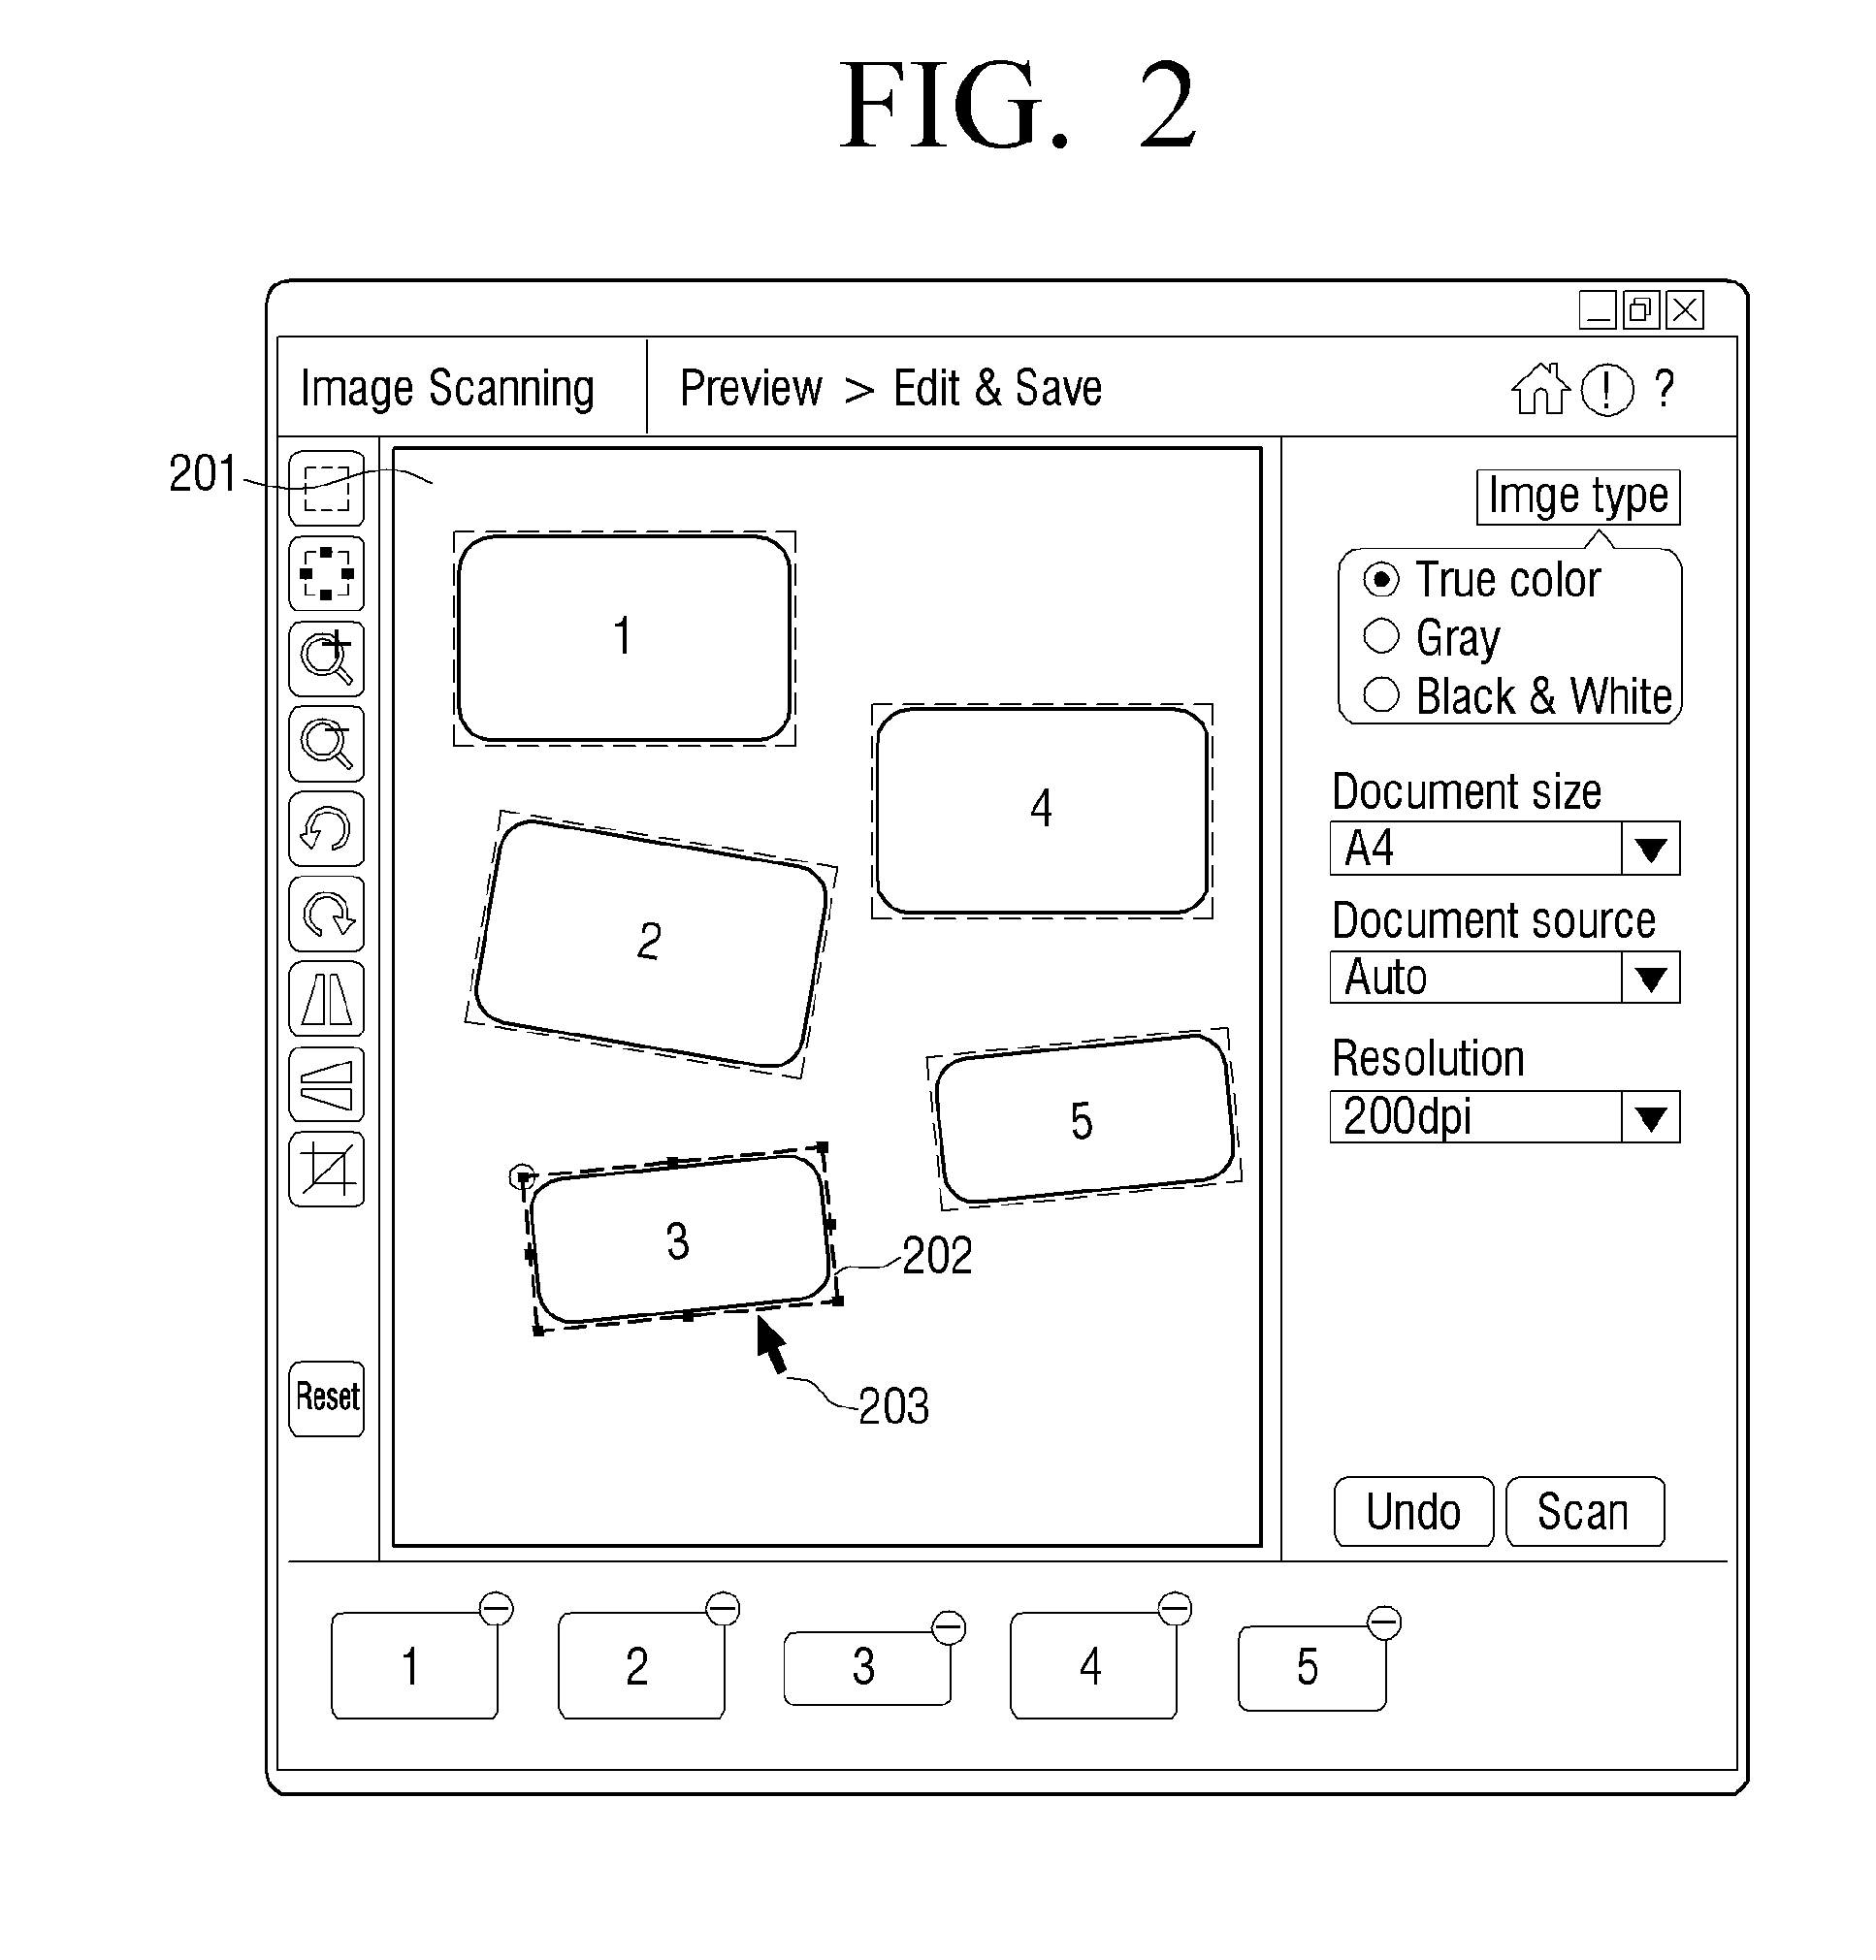 Method of editing static digital combined images comprising images of multiple objects